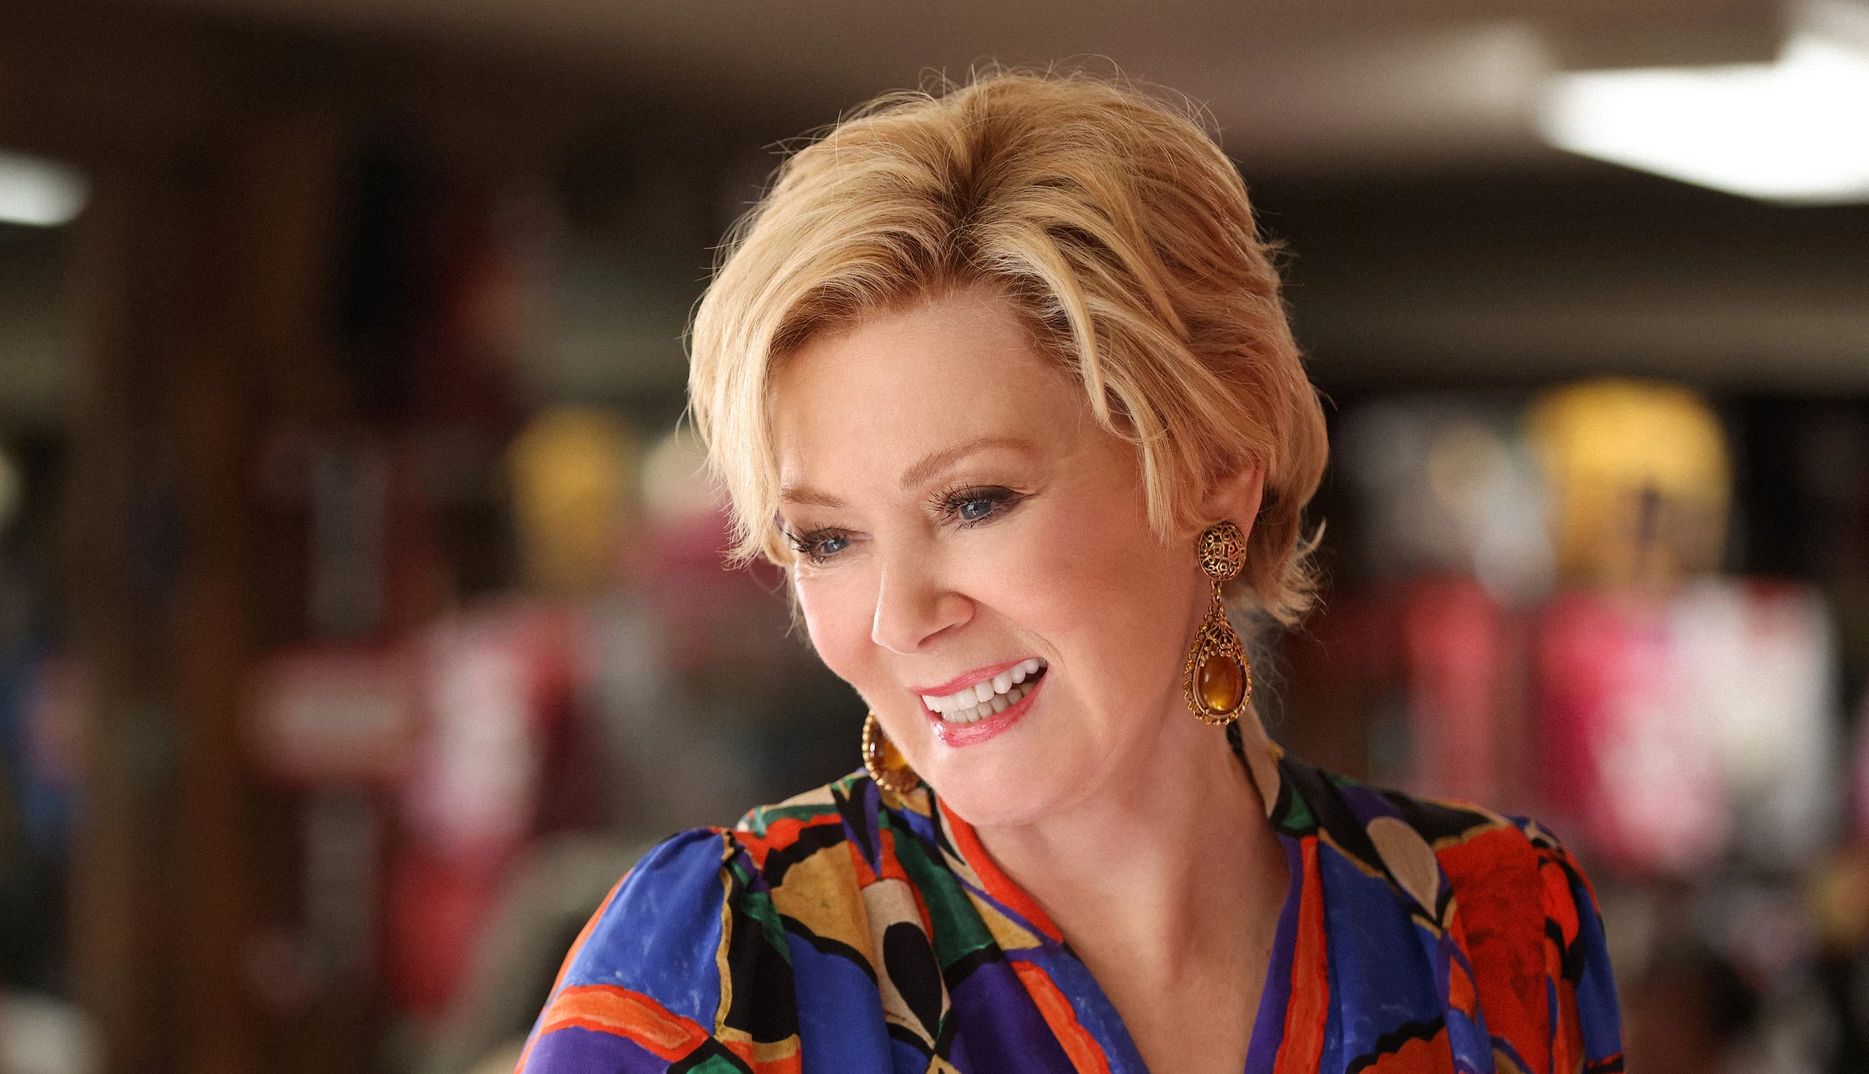 Jean Smart smiling in a scene from the Max series Hacks